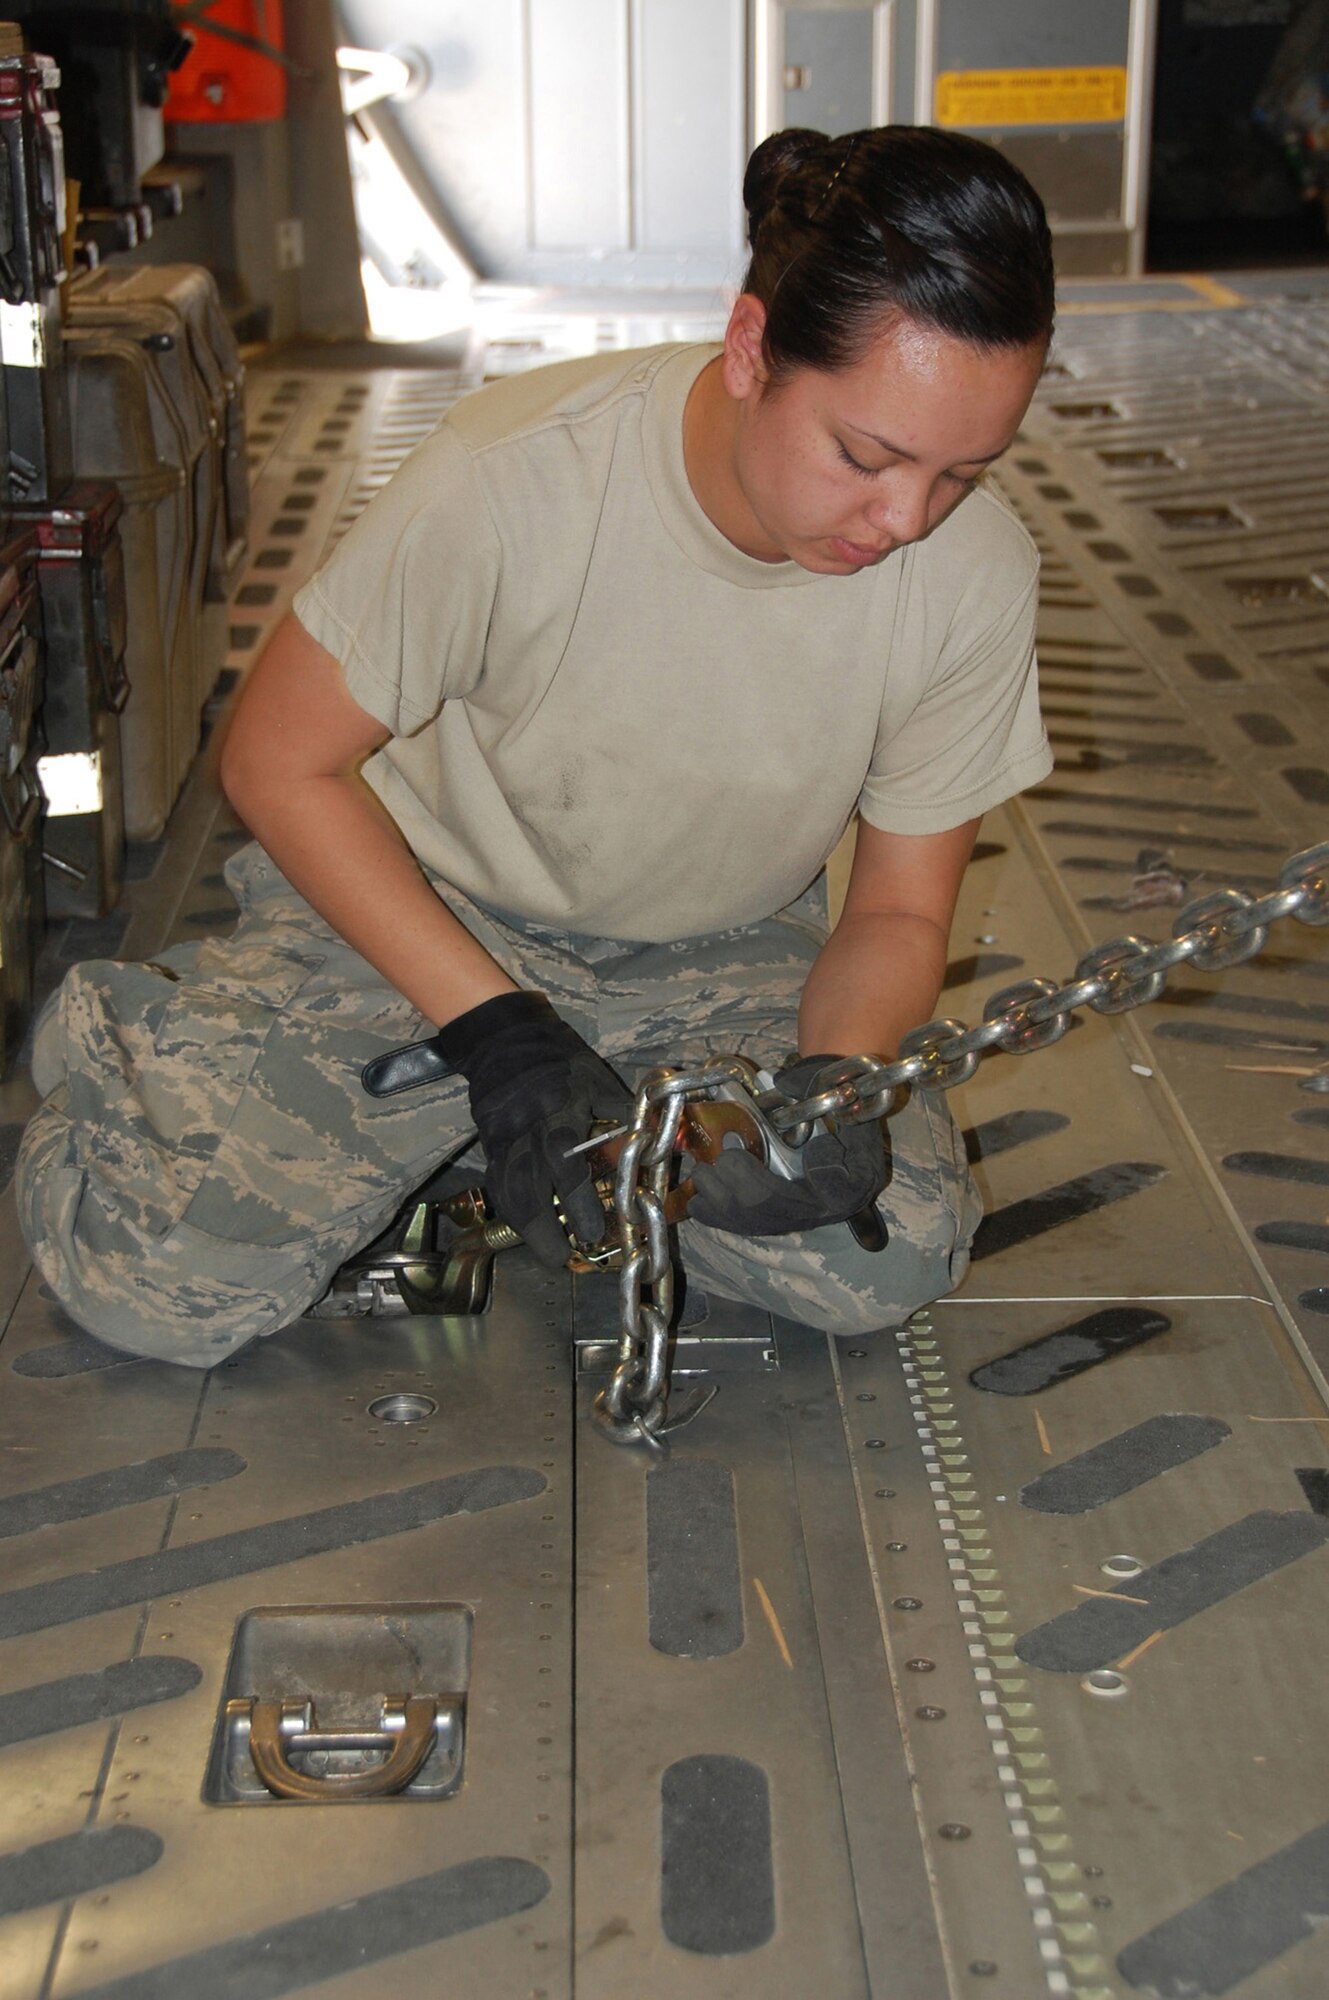 Senior Airman Danielle Bolia, 386th Expeditionary Logistics Readiness Squadron Aerial Port, secures a piece of rolling stock April 27 in Southwest Asia. The Airman is a deployed reservist out of the 71st Aerial Port Squadron, Langley Air Force Base, Va. The 71st APS is a geographically separated unit of the 512th Airlift Wing located at Dover Air Force Base, Del. (U.S. Air Force photo/Tech. Sgt. Lindsey Maurice)